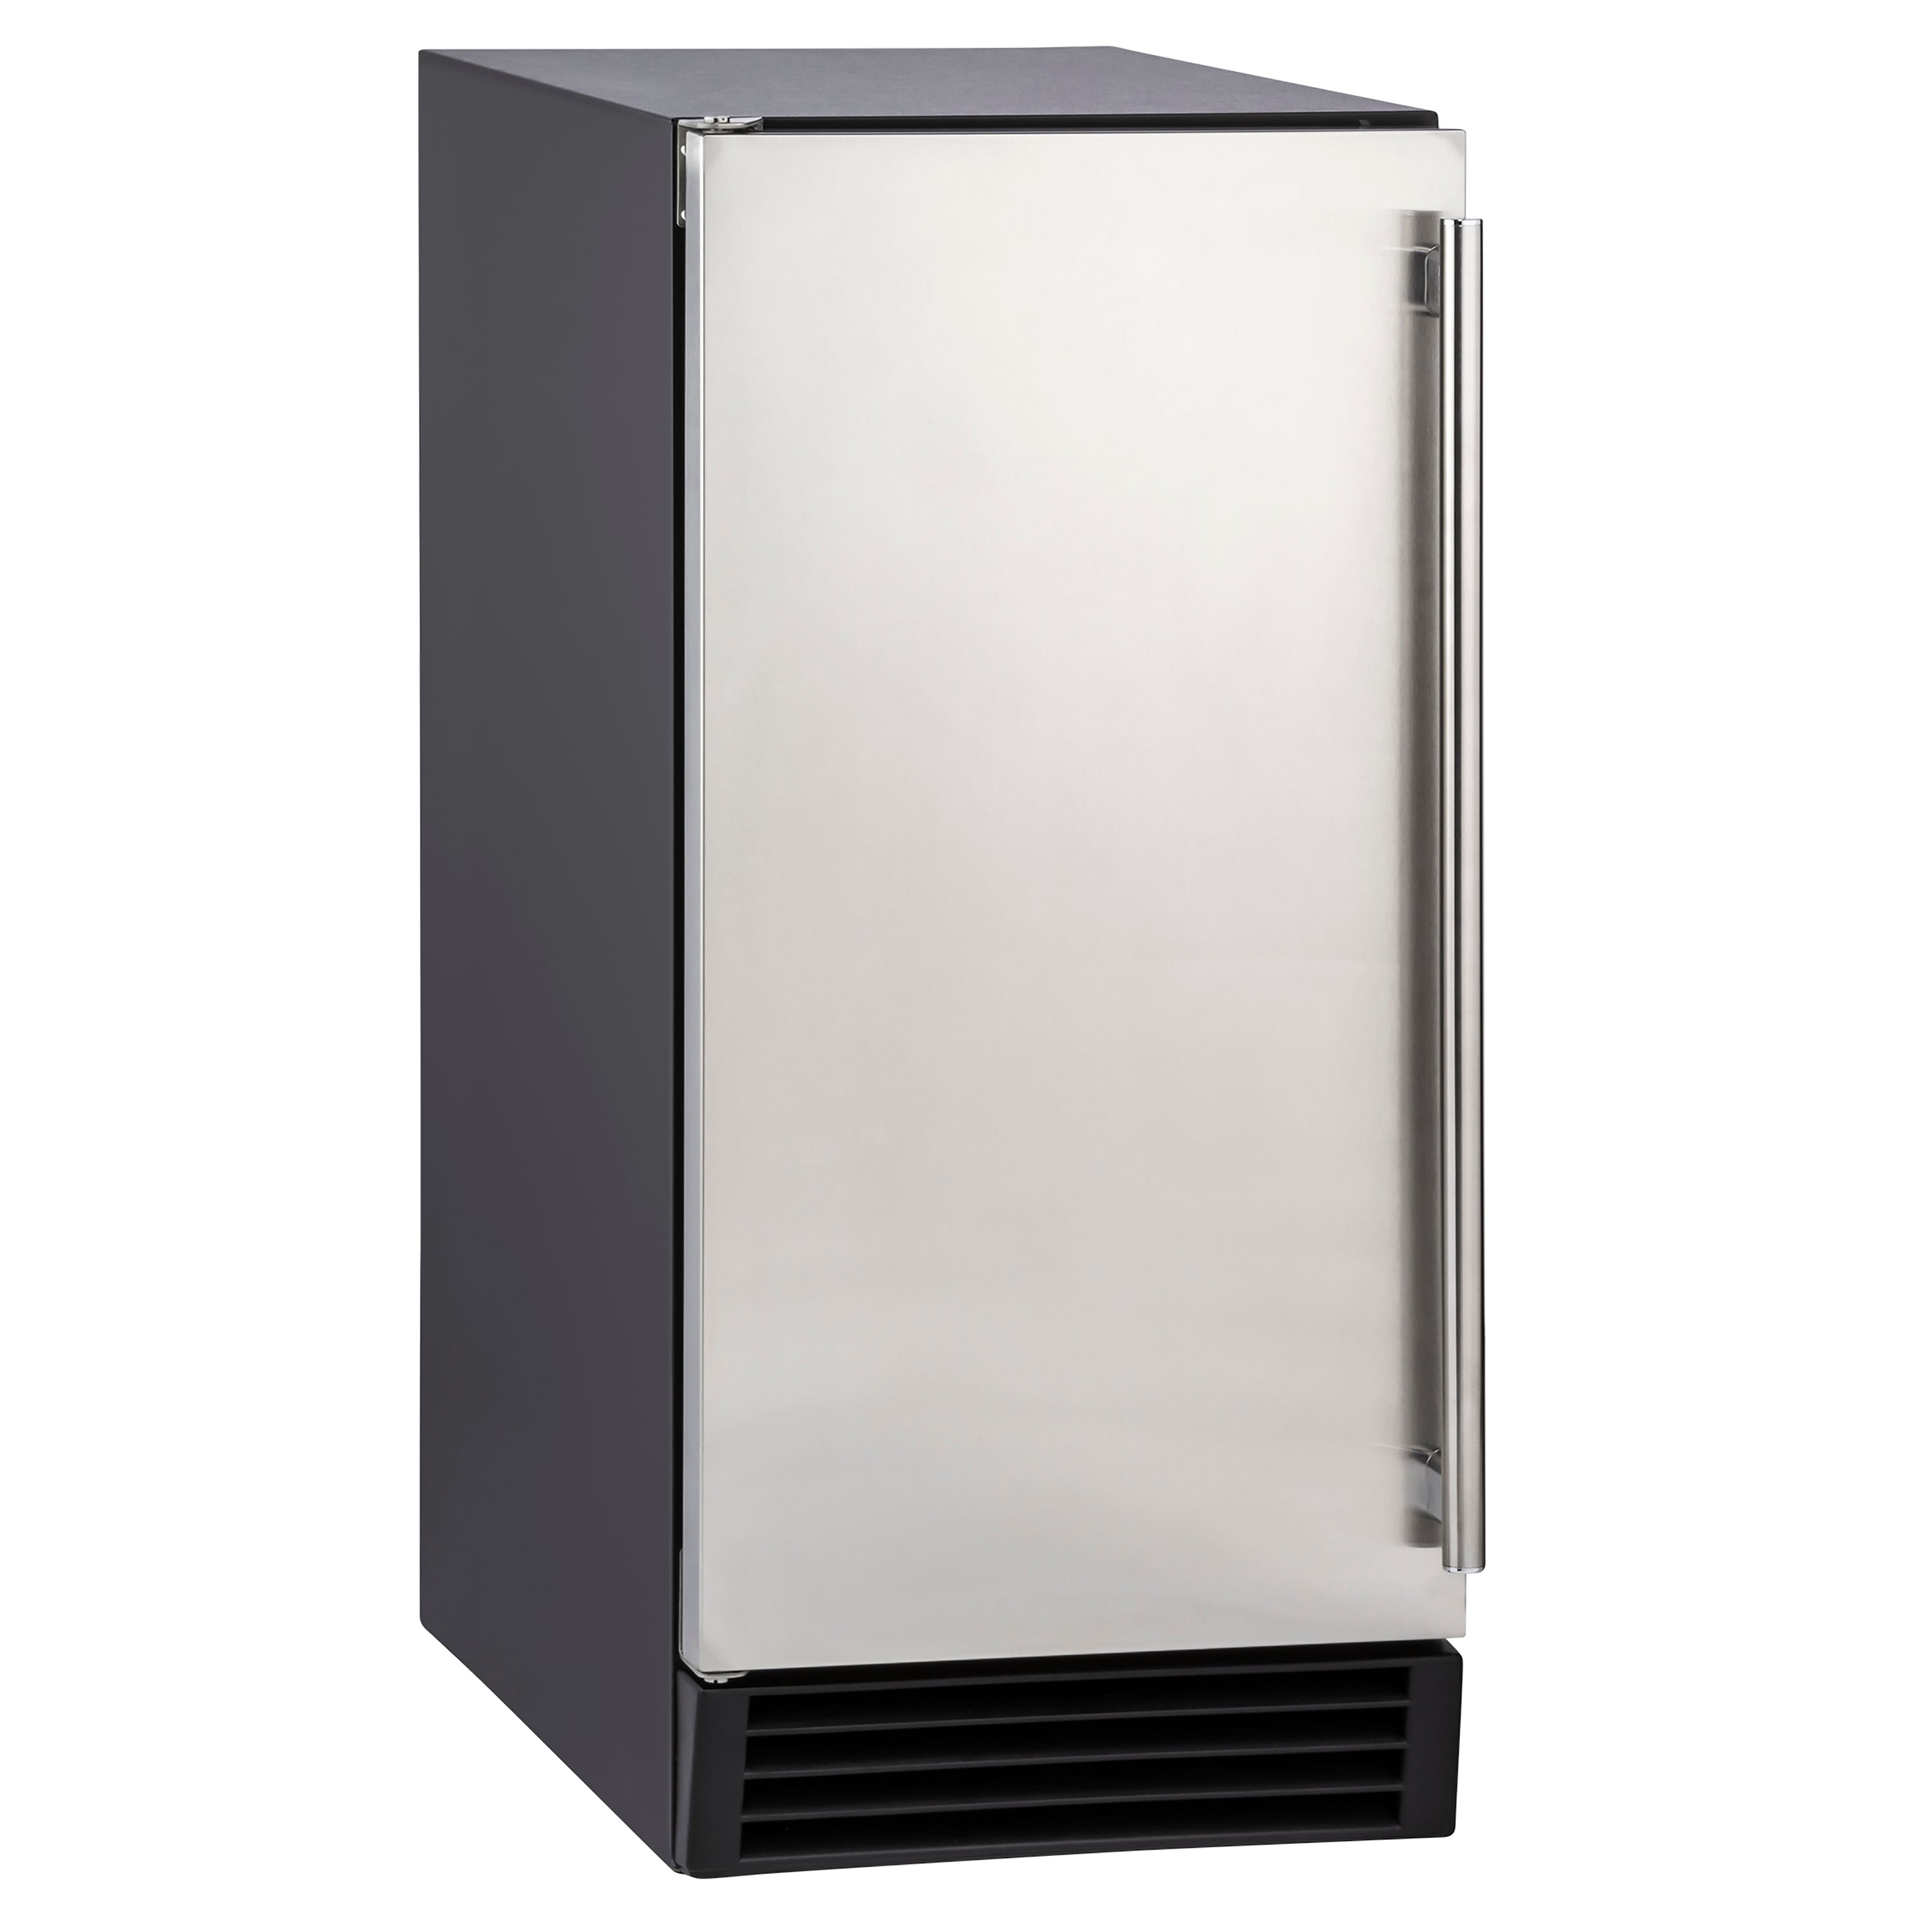 Maxx Ice MIM25C, Shallow Depth Indoor Built-in Undercounter Ice Maker, 25  lbs, in Stainless Steel